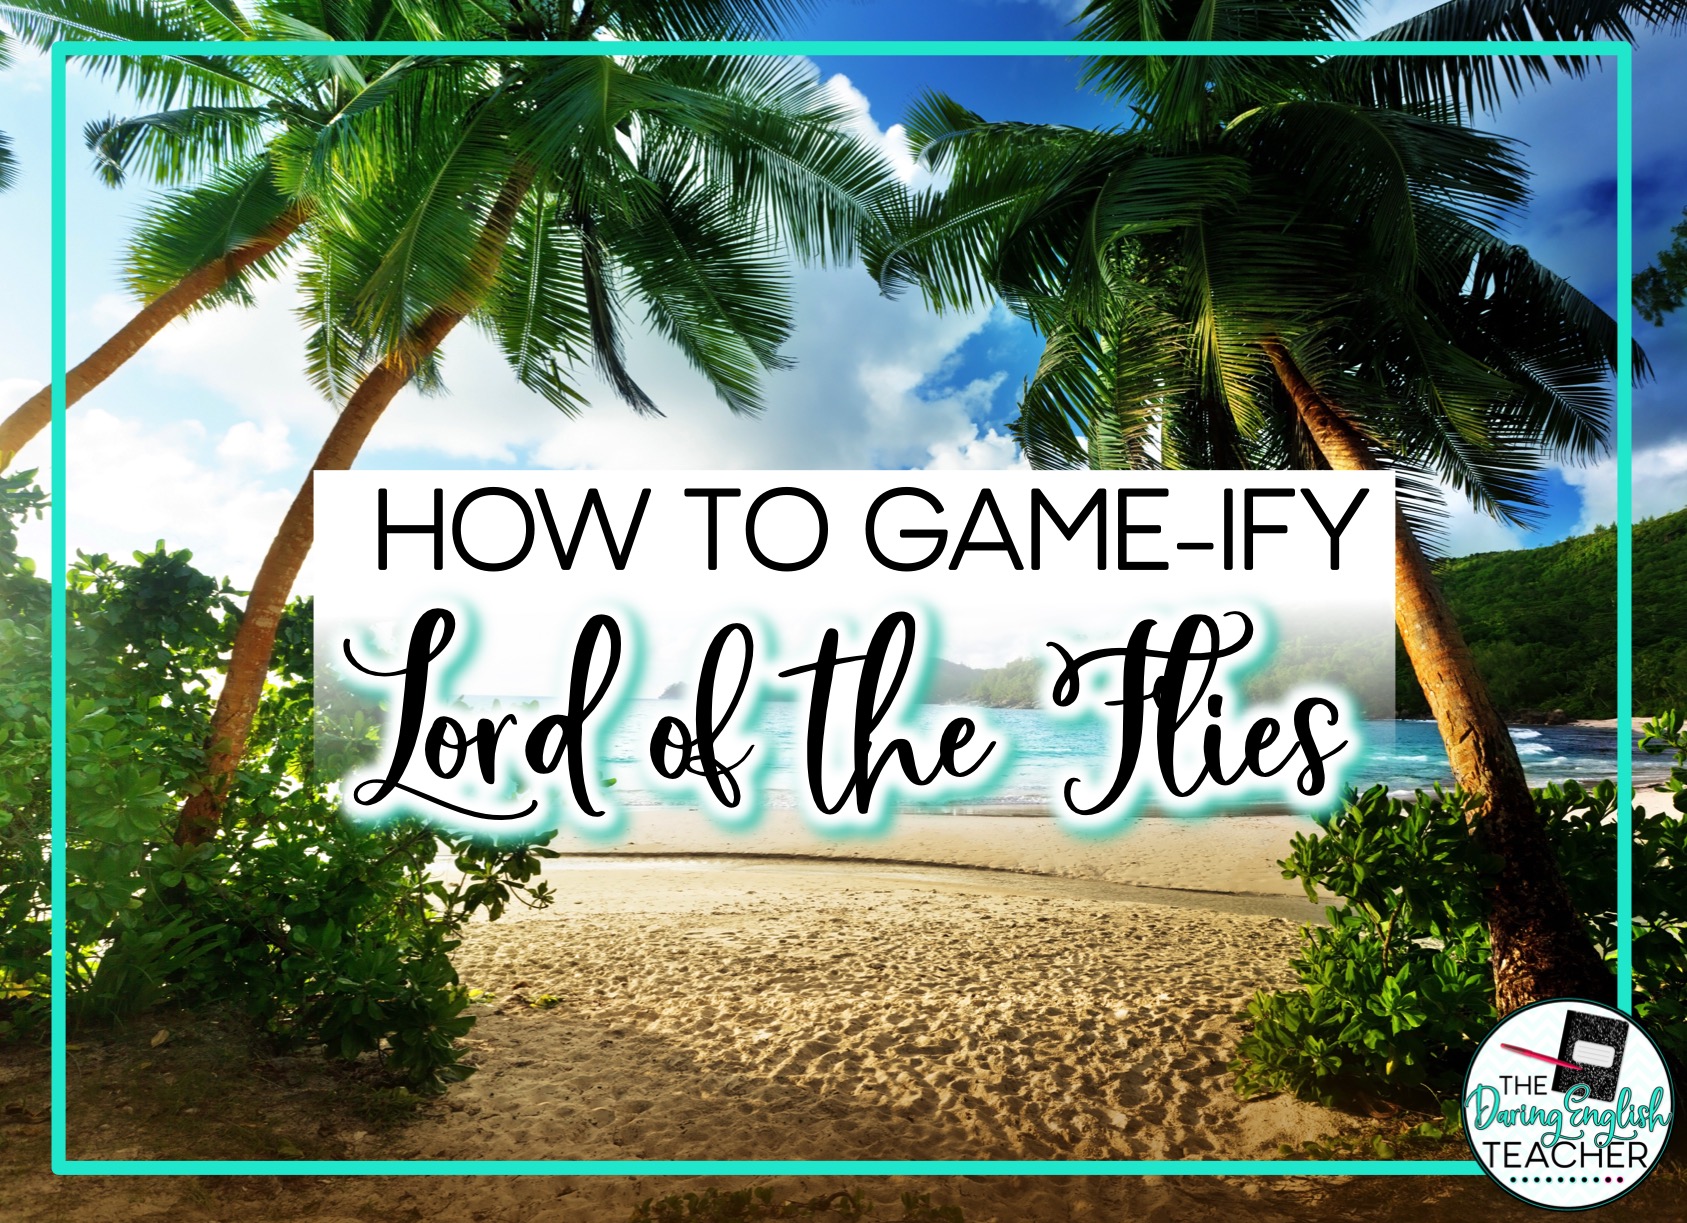 Gamifying Lord of the Flies for a Fun Novel Study